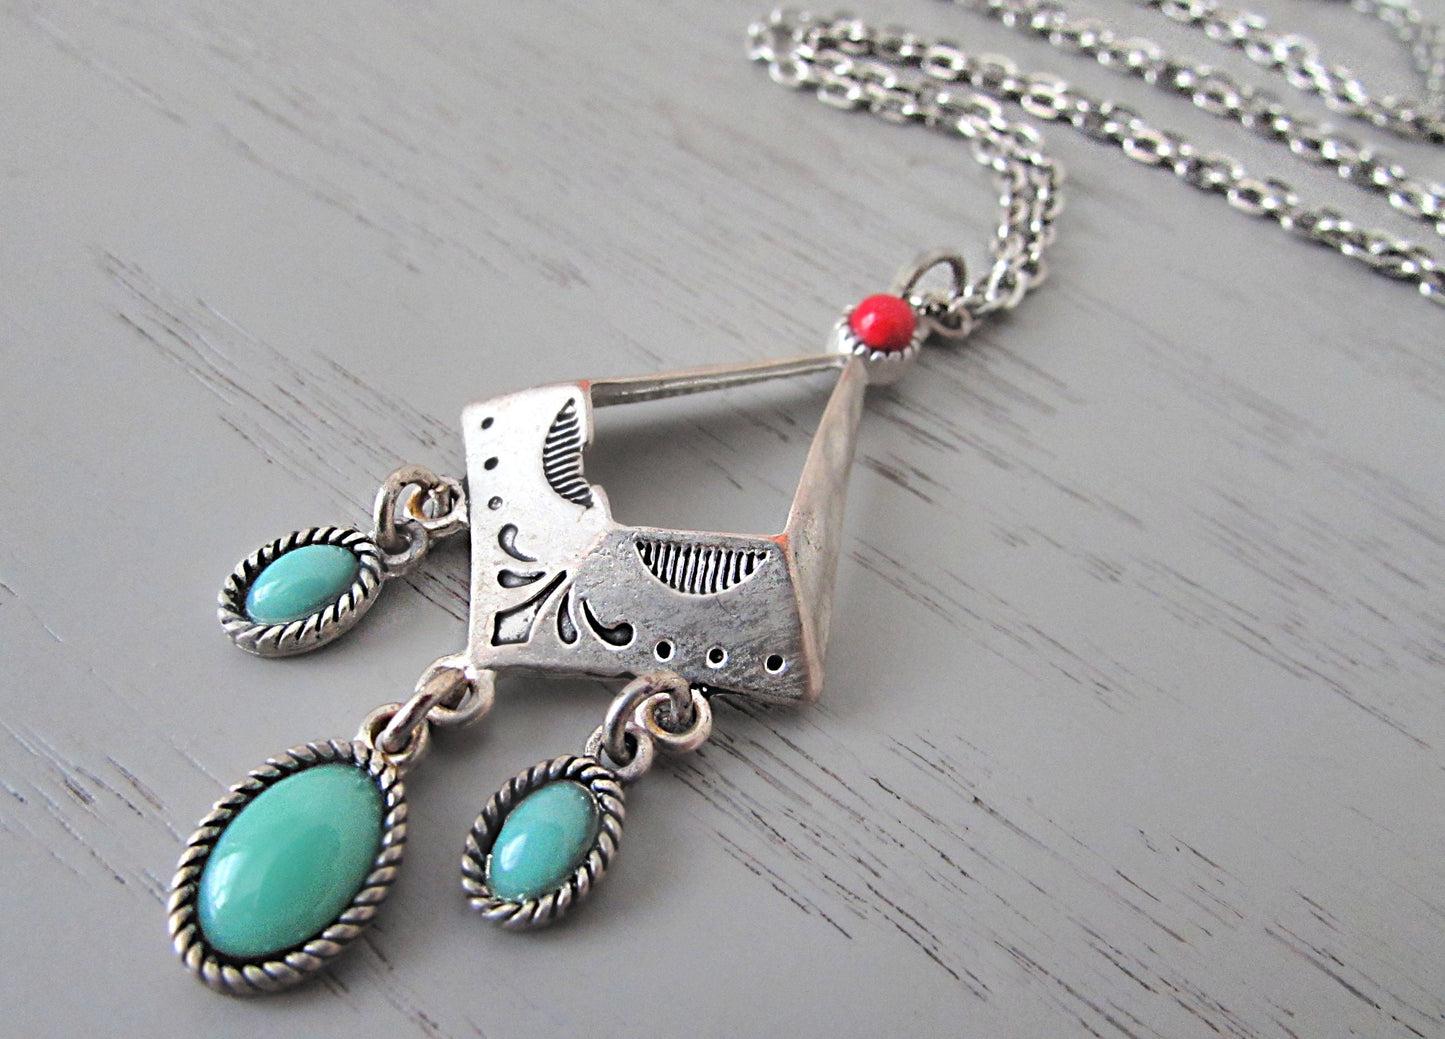 1970s Silver Tone Southwestern Necklace with Turquoise and Red Stones, from Piggle and Pop